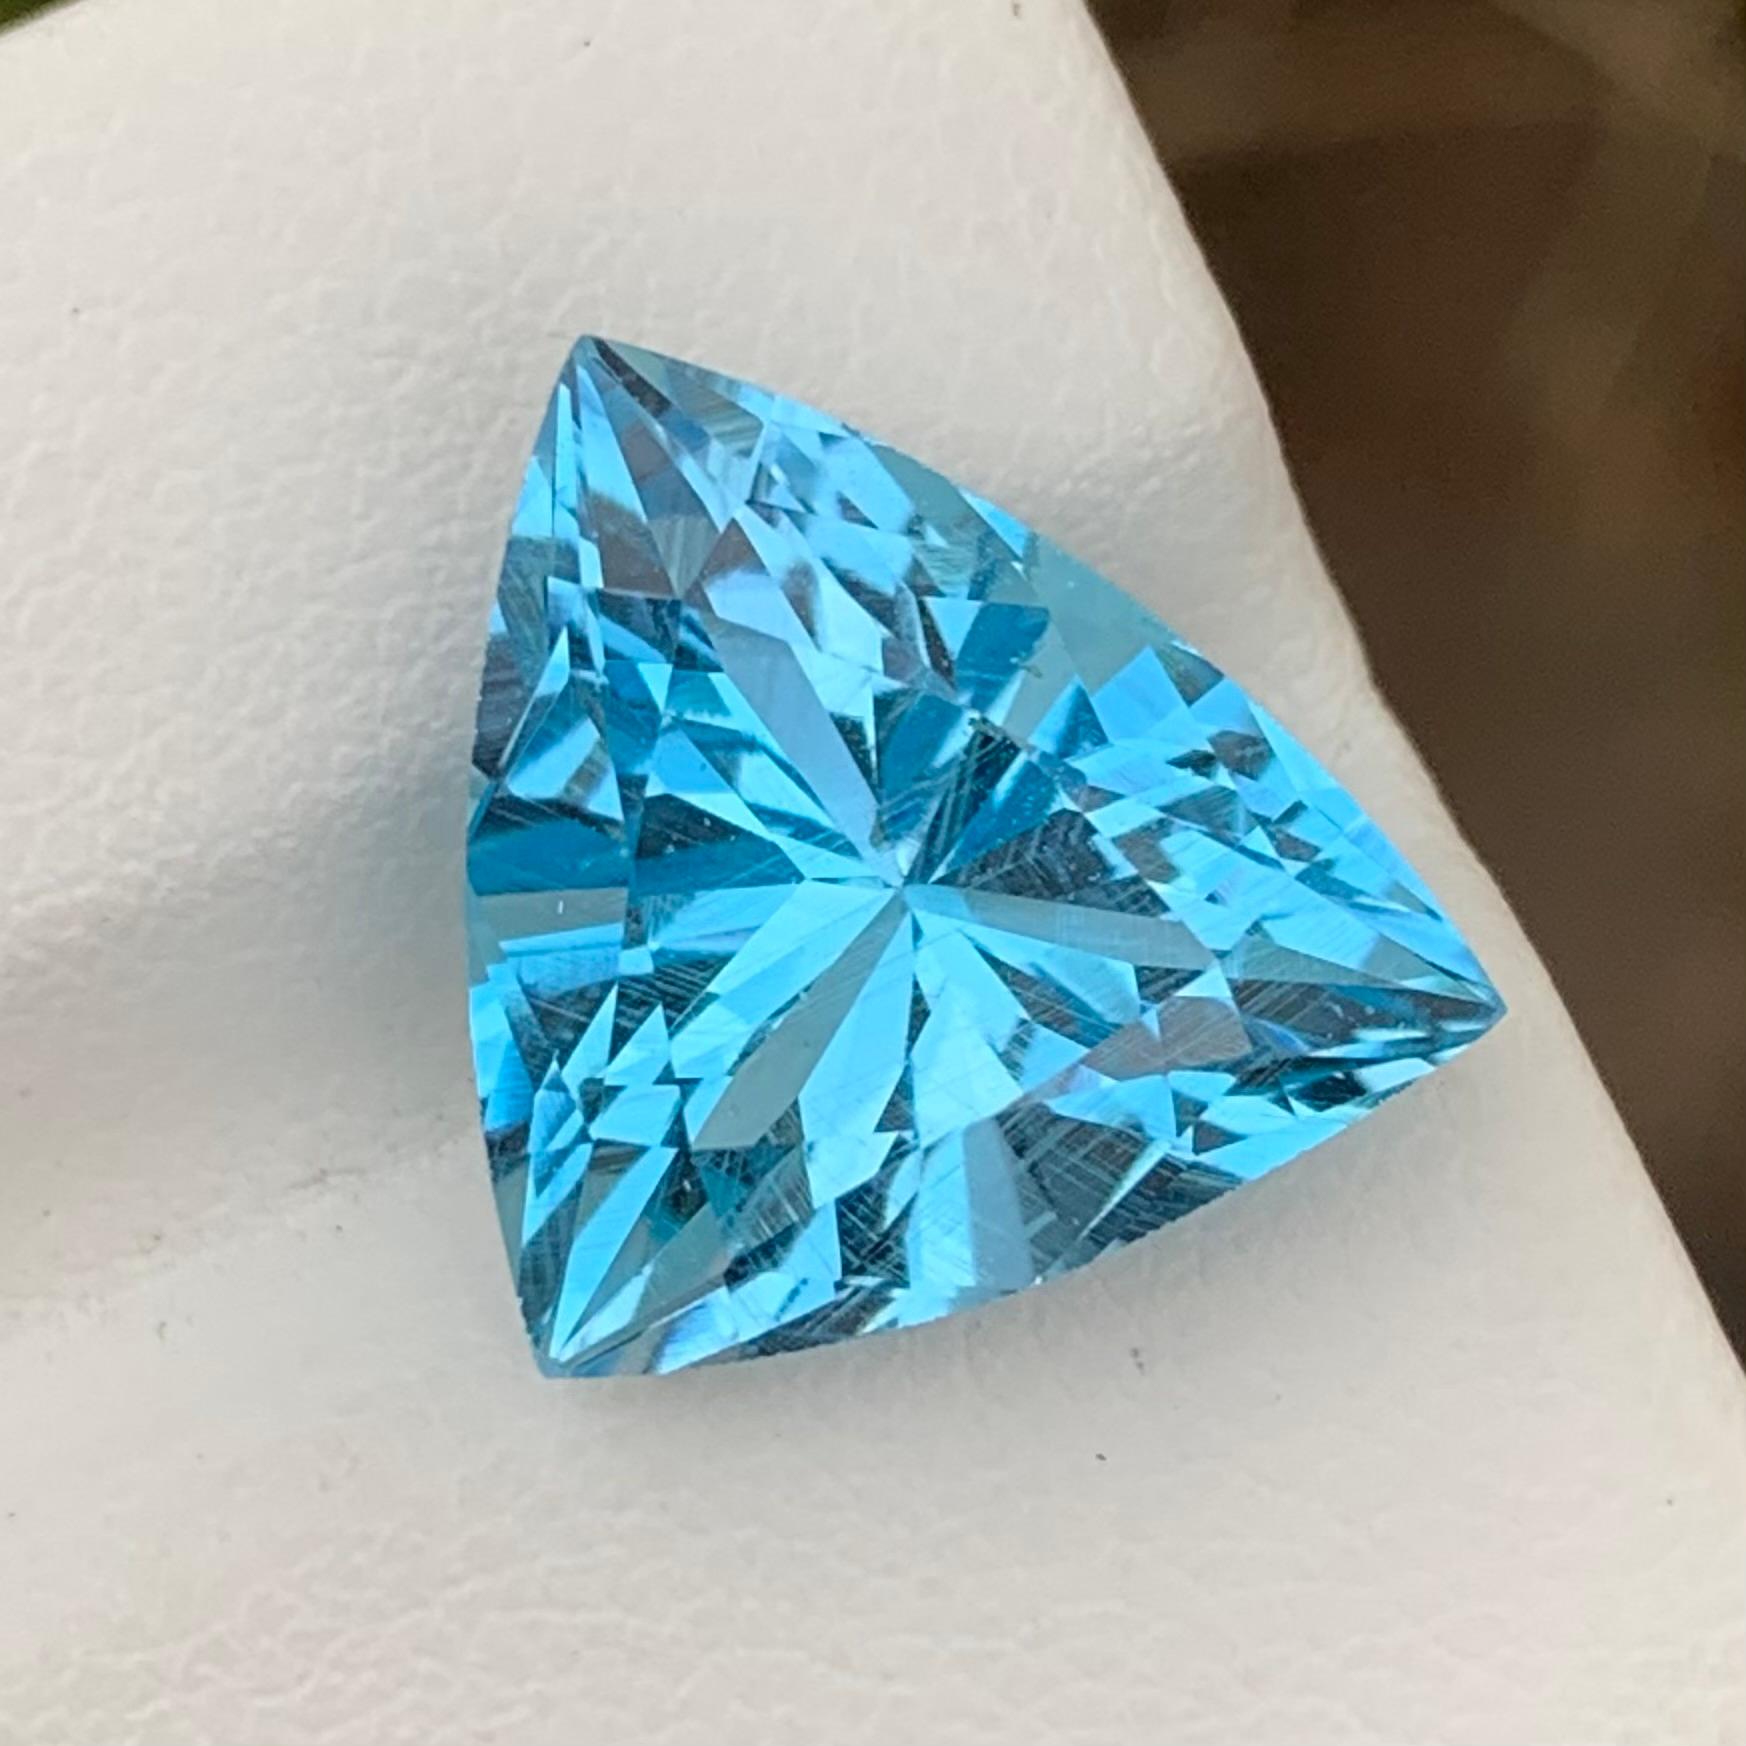 Loose Blue Topaz 
Weight: 9.55 Carats
Dimension: 13.1 x 13.1 x 8.8 Mm 
Origin: Brazil
Colour: Blue
Certificate: On Demand
Shape: Triangle 

Blue topaz is a stunning gemstone prized for its vibrant blue color and remarkable clarity. It belongs to the